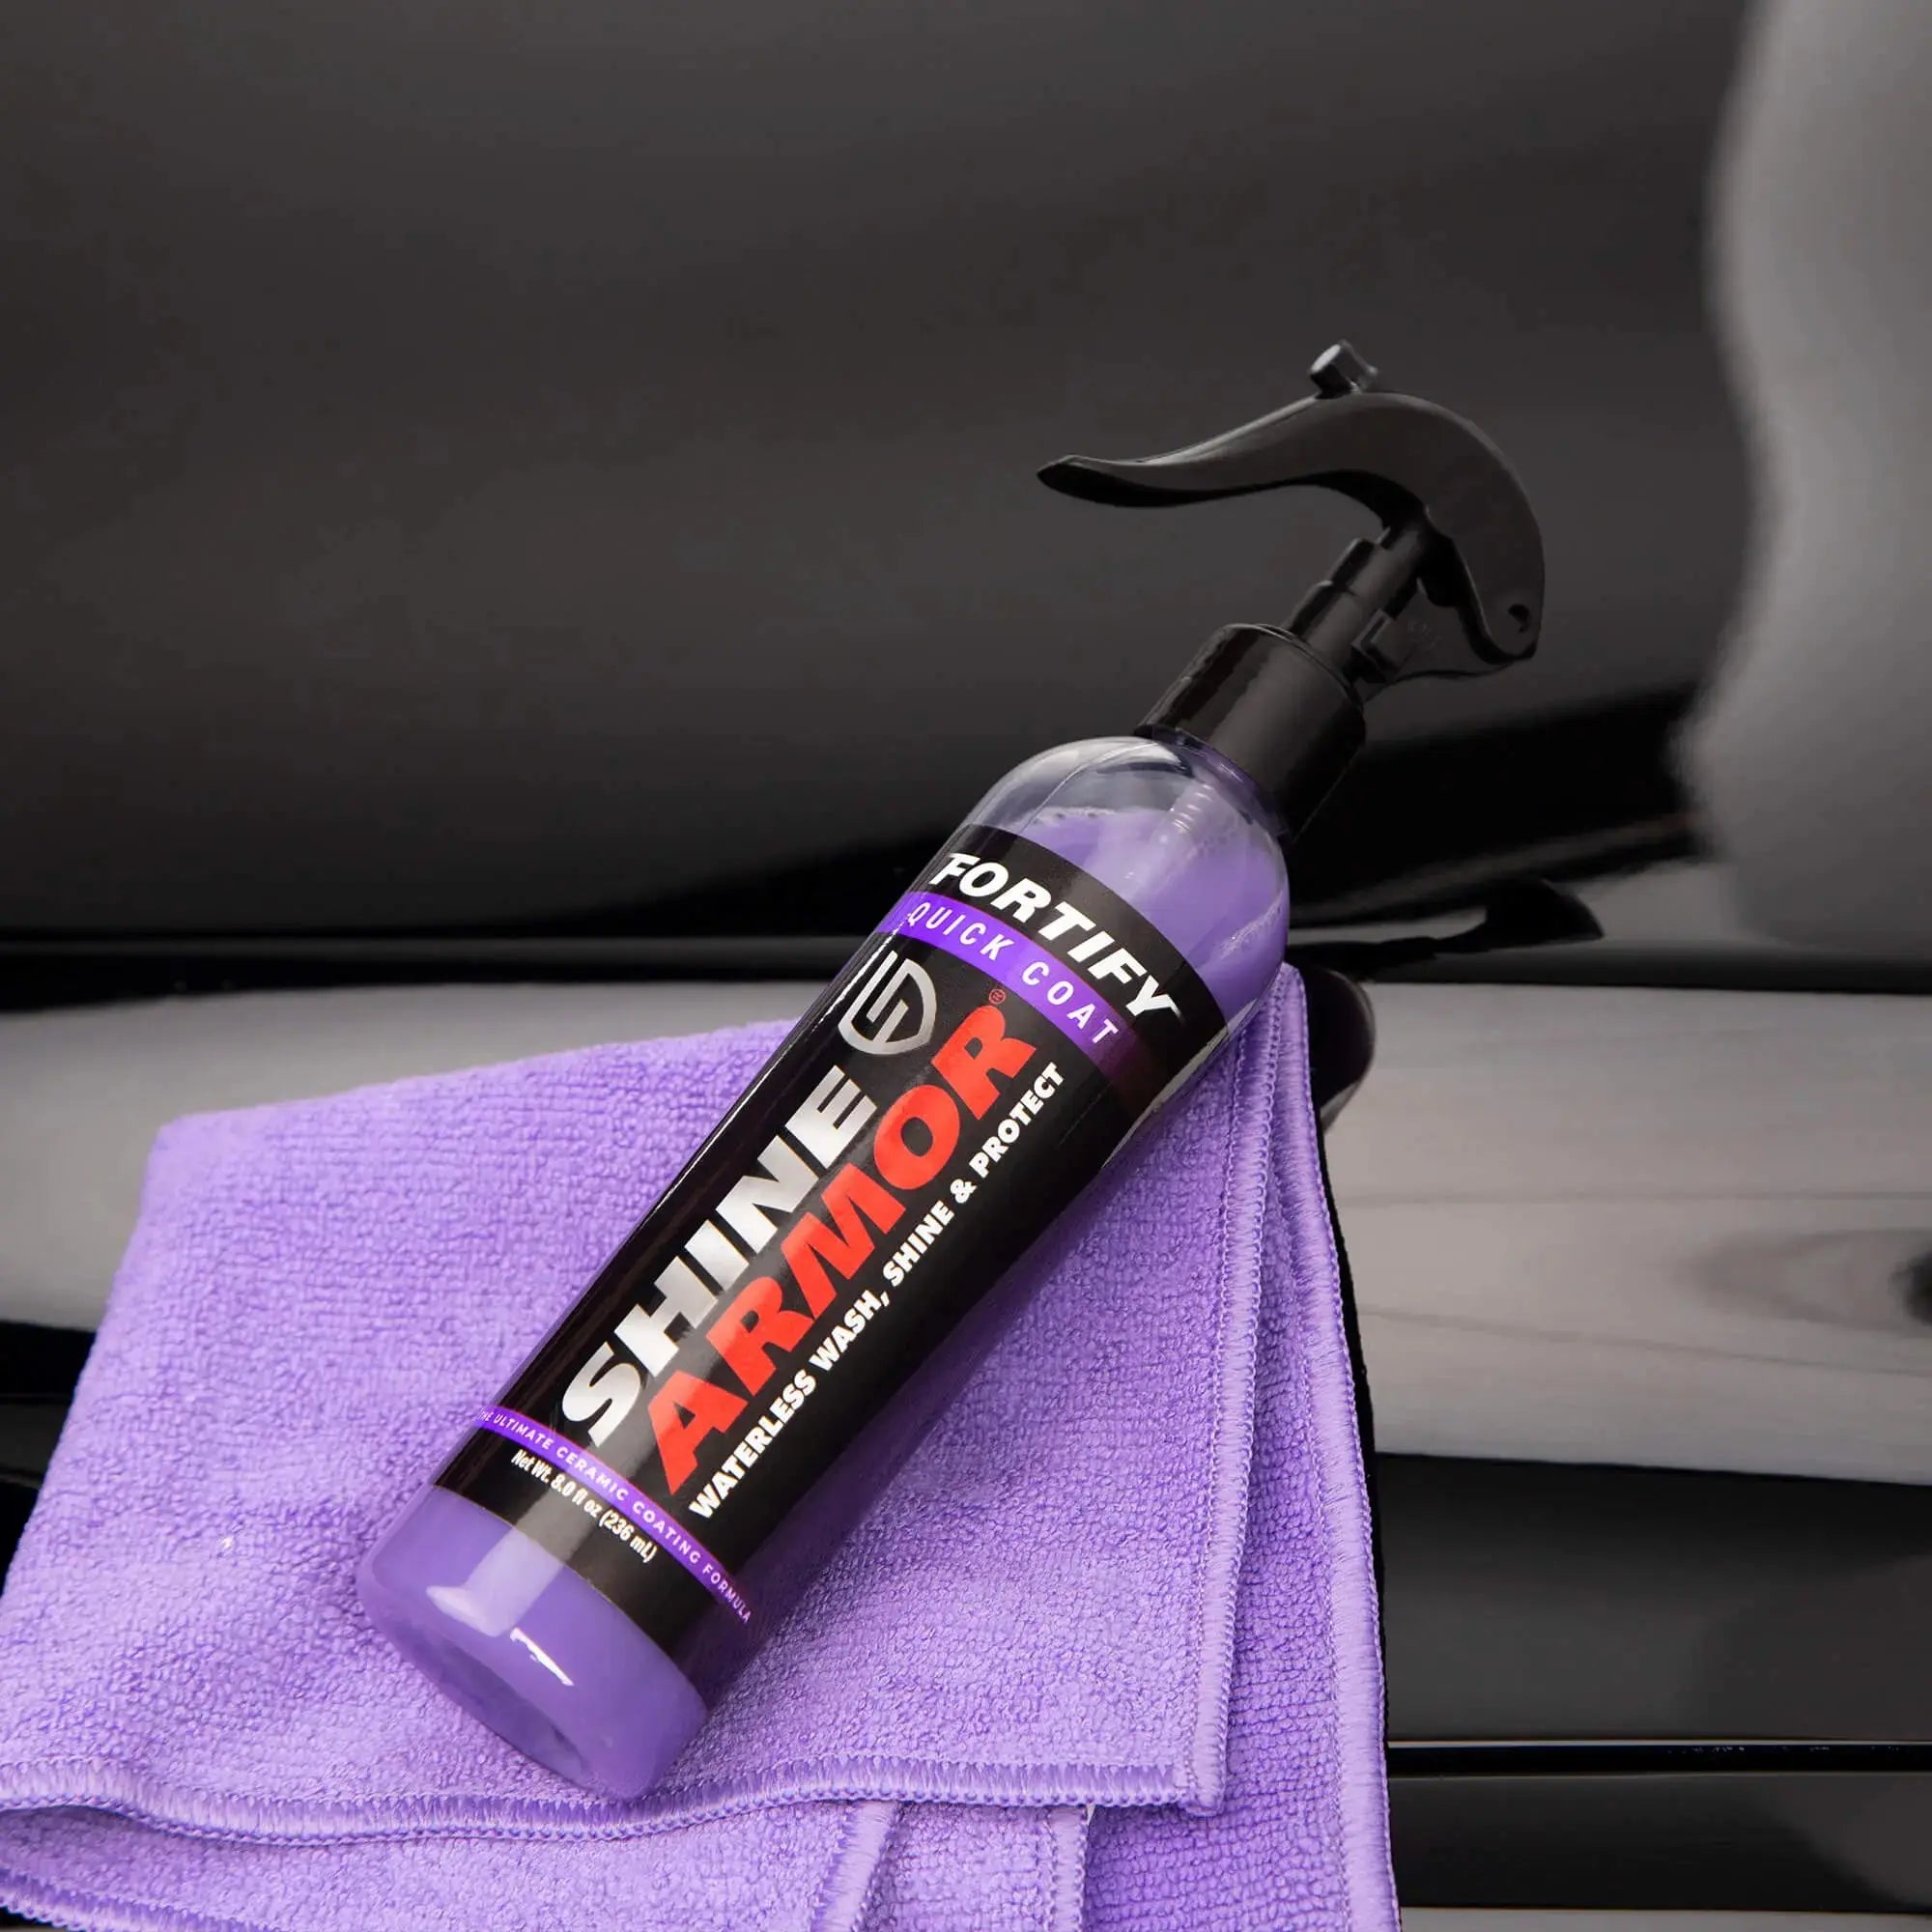  SHINE ARMOR Leather Cleaner & Conditioner Protector for Couches  Car Interior Apparel Furniture and Deicer Spray for Car Windshield Windows  Wipers and Mirrors : Automotive